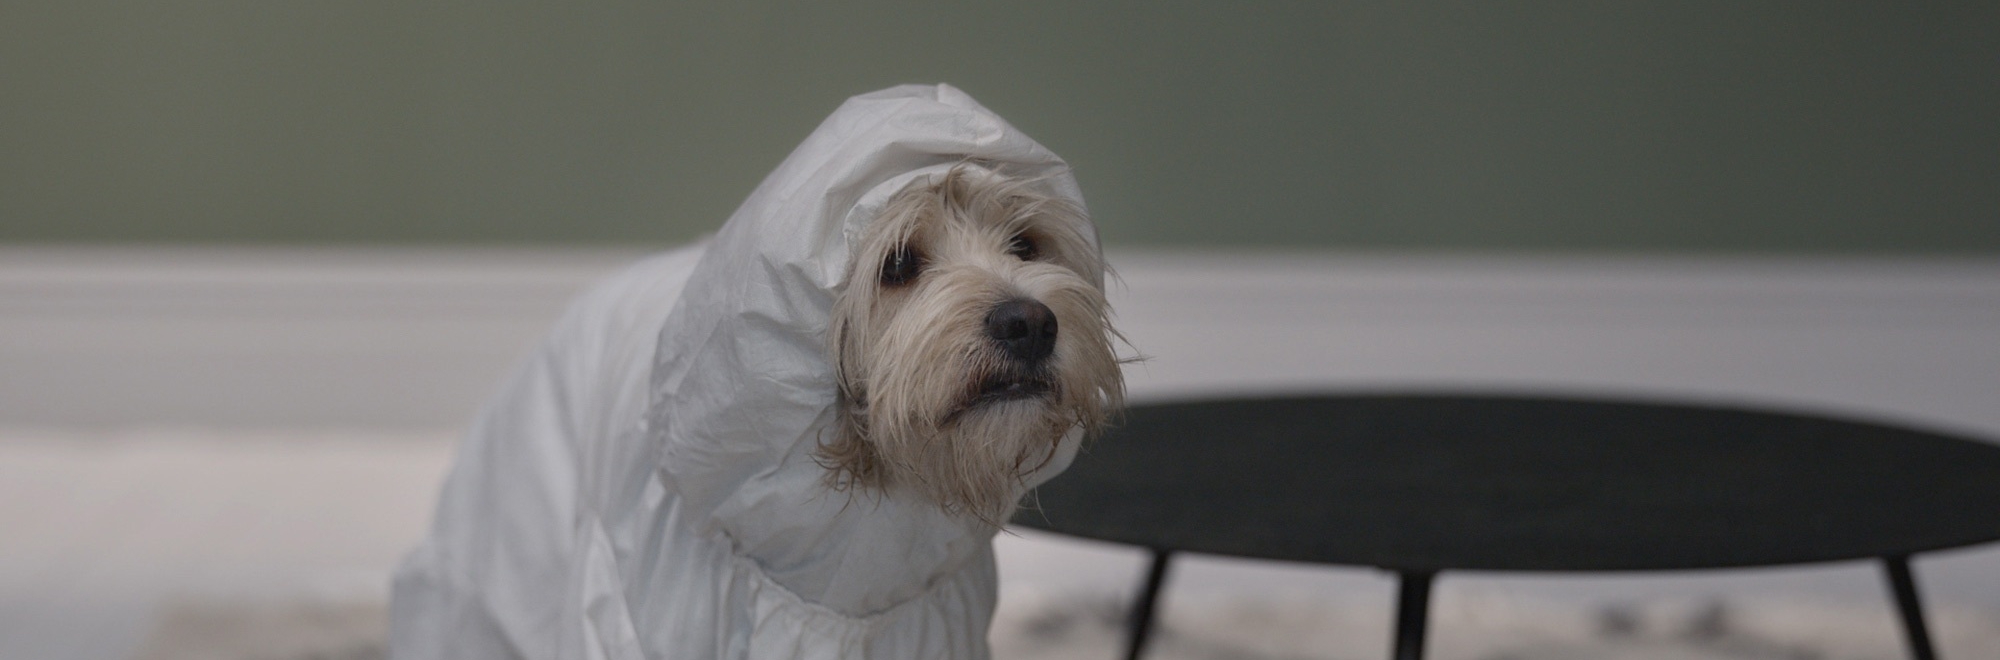 Homeowners take it a step too far in this series of debut TV ads for Farrow & Ball